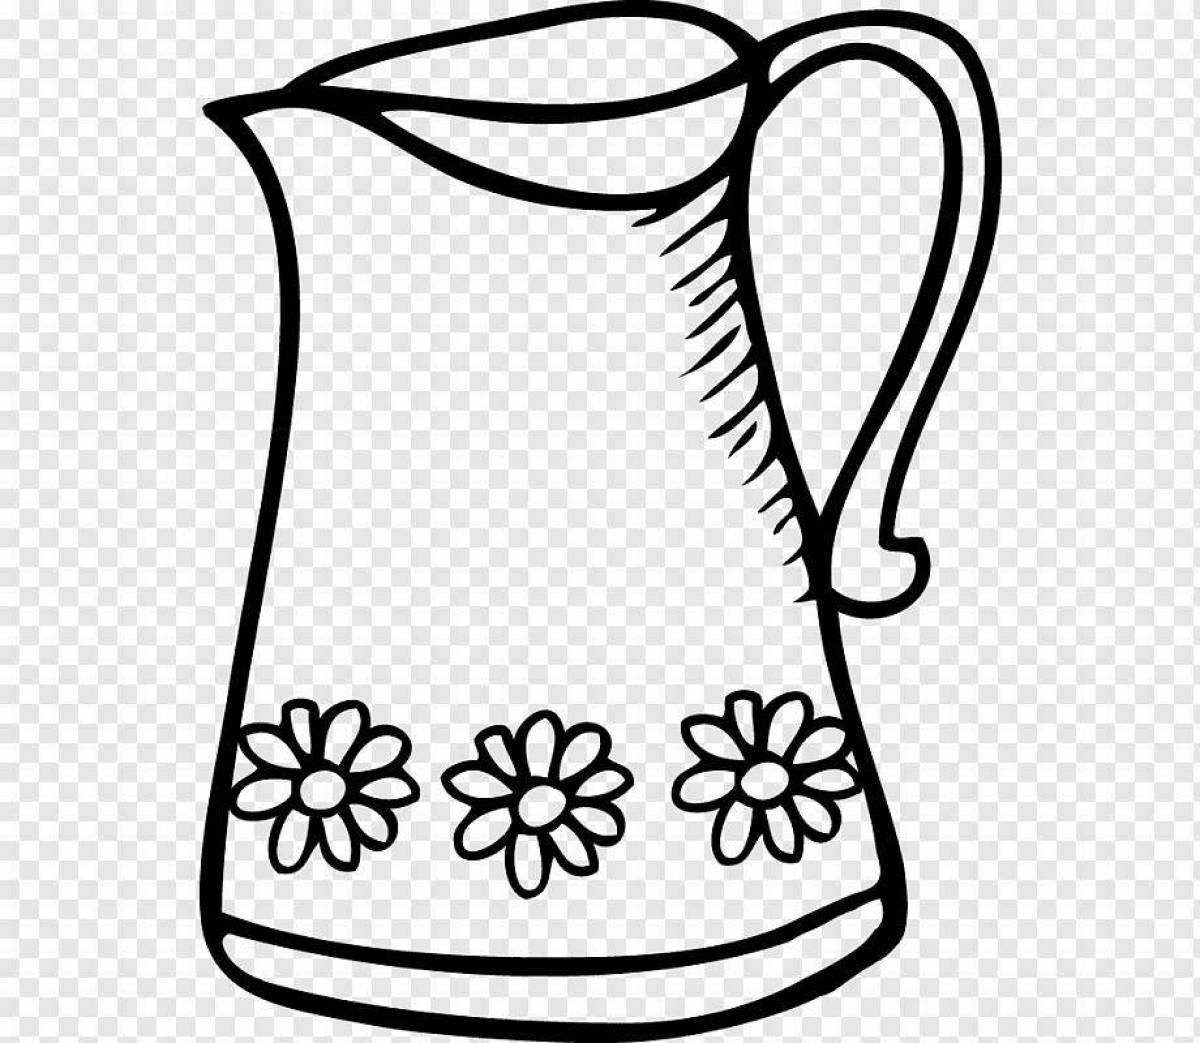 Live jug coloring page for kids